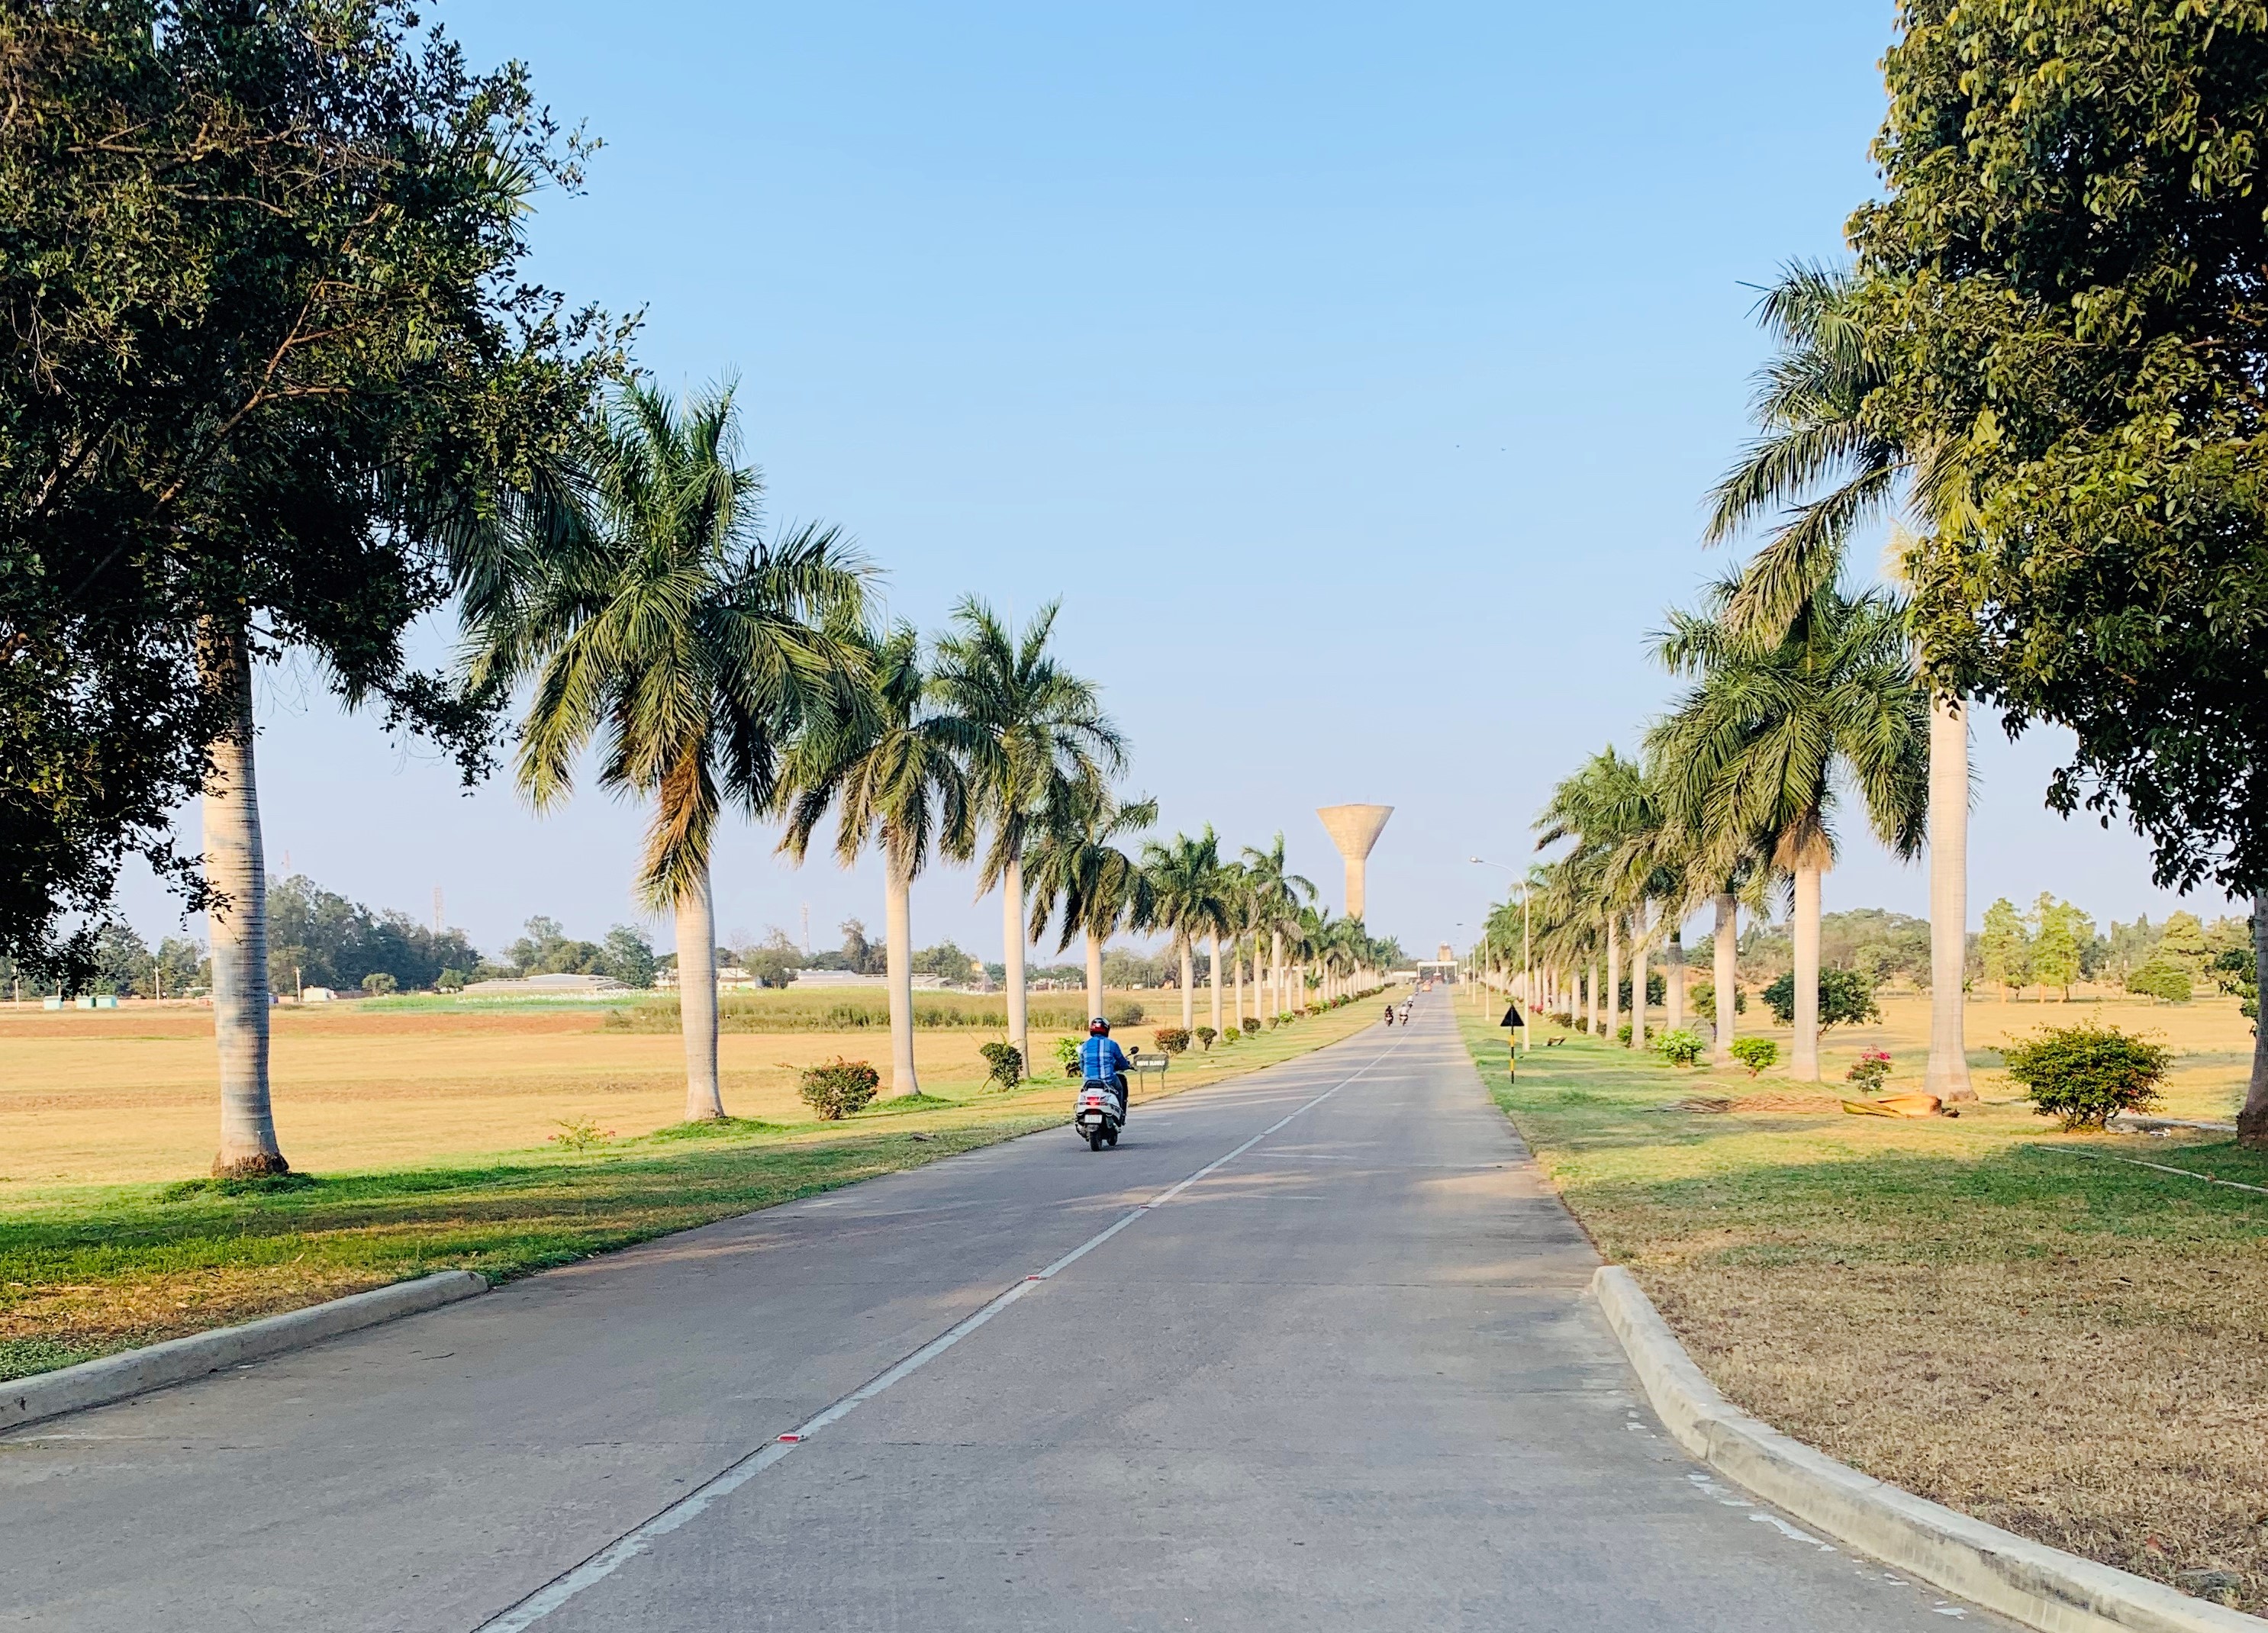 The grounds of ICRISAT who hosted the TIGR2ESS General Assembly